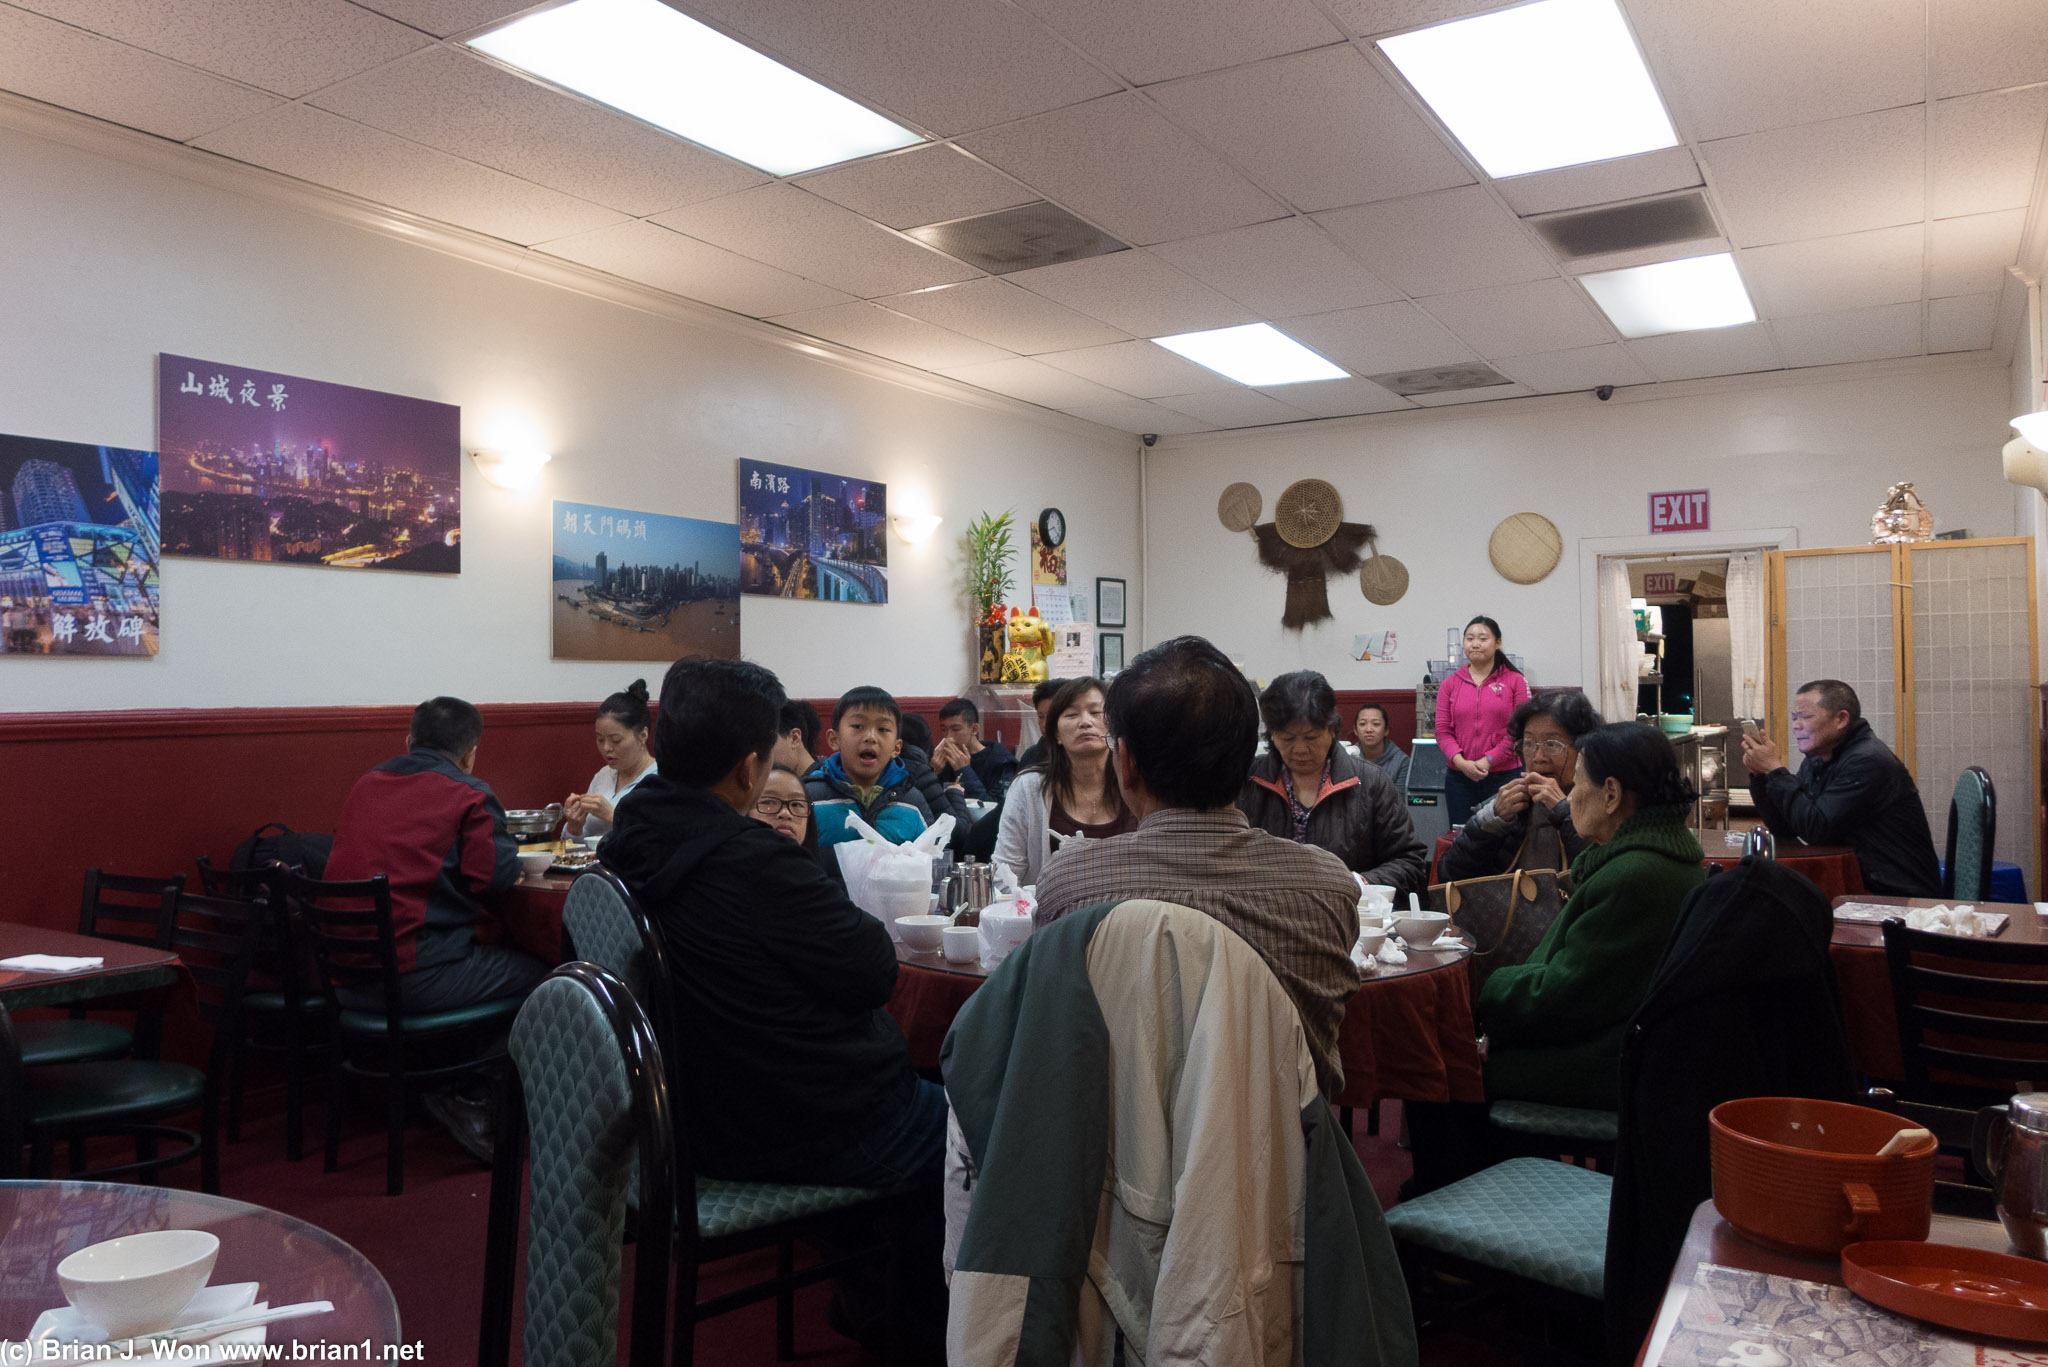 Typical long-established Chinese restaurant interior, maybe a bit nicer than some others.